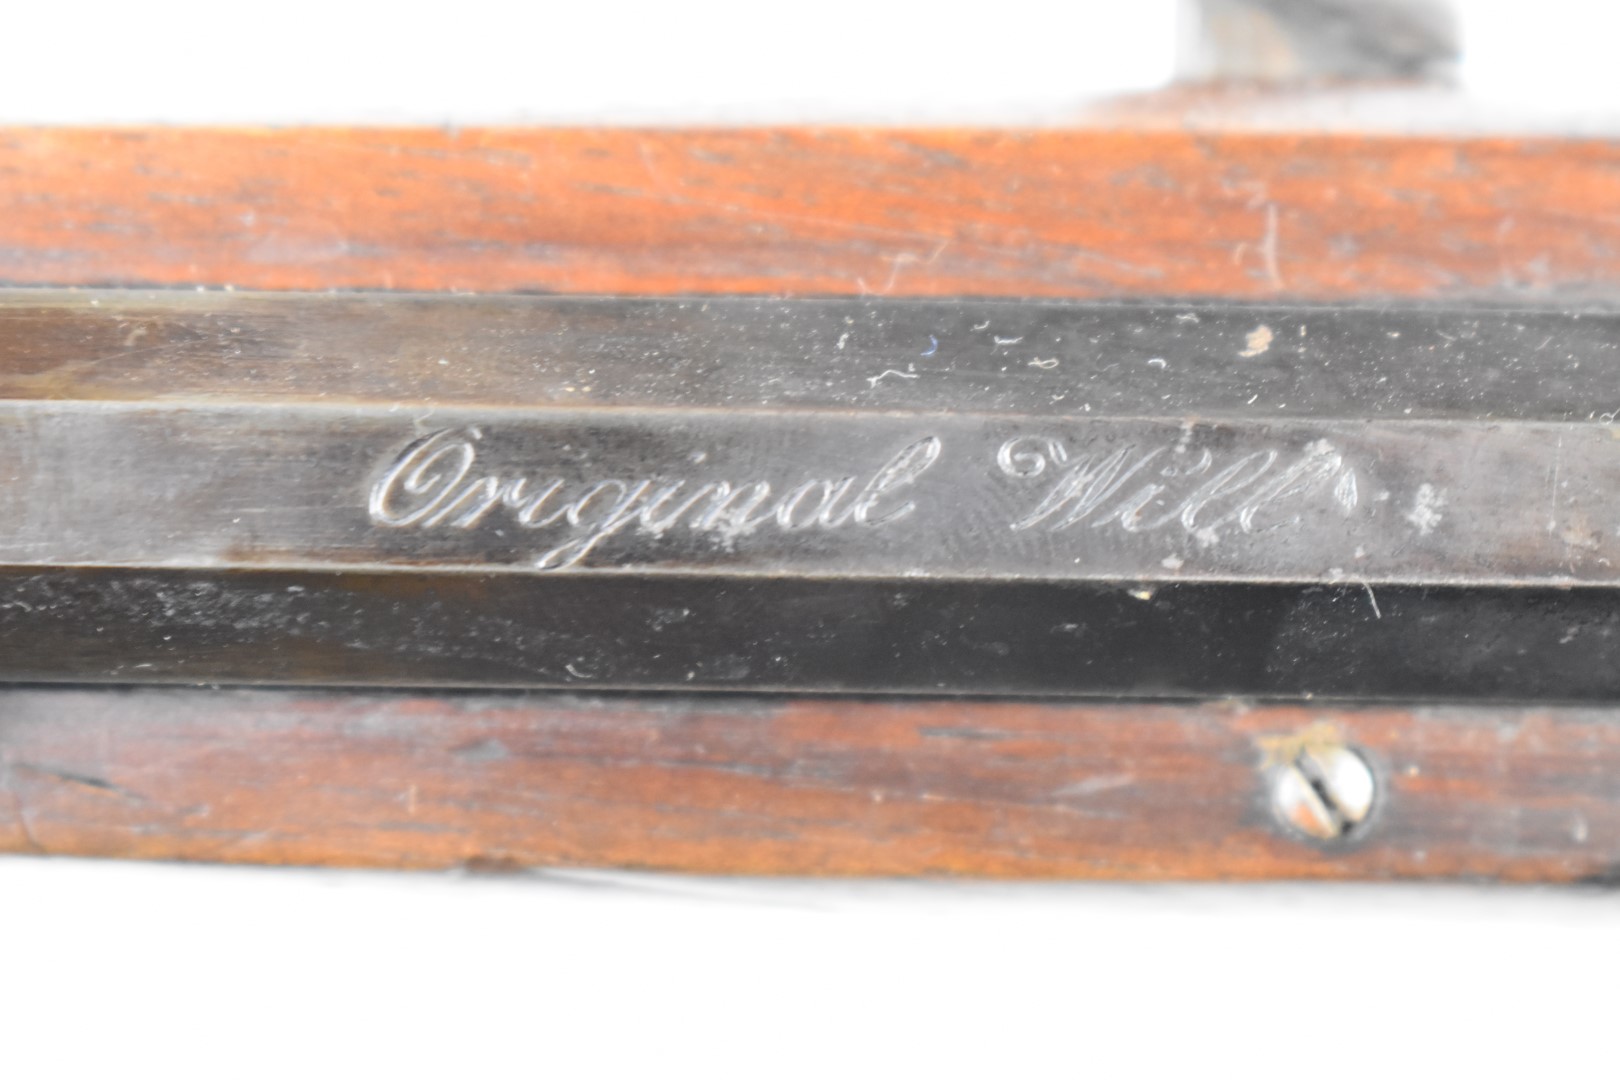 Oscar Will Bugelspanner .177 underlever air rifle with chequered grip, metal butt plate, - Image 6 of 8